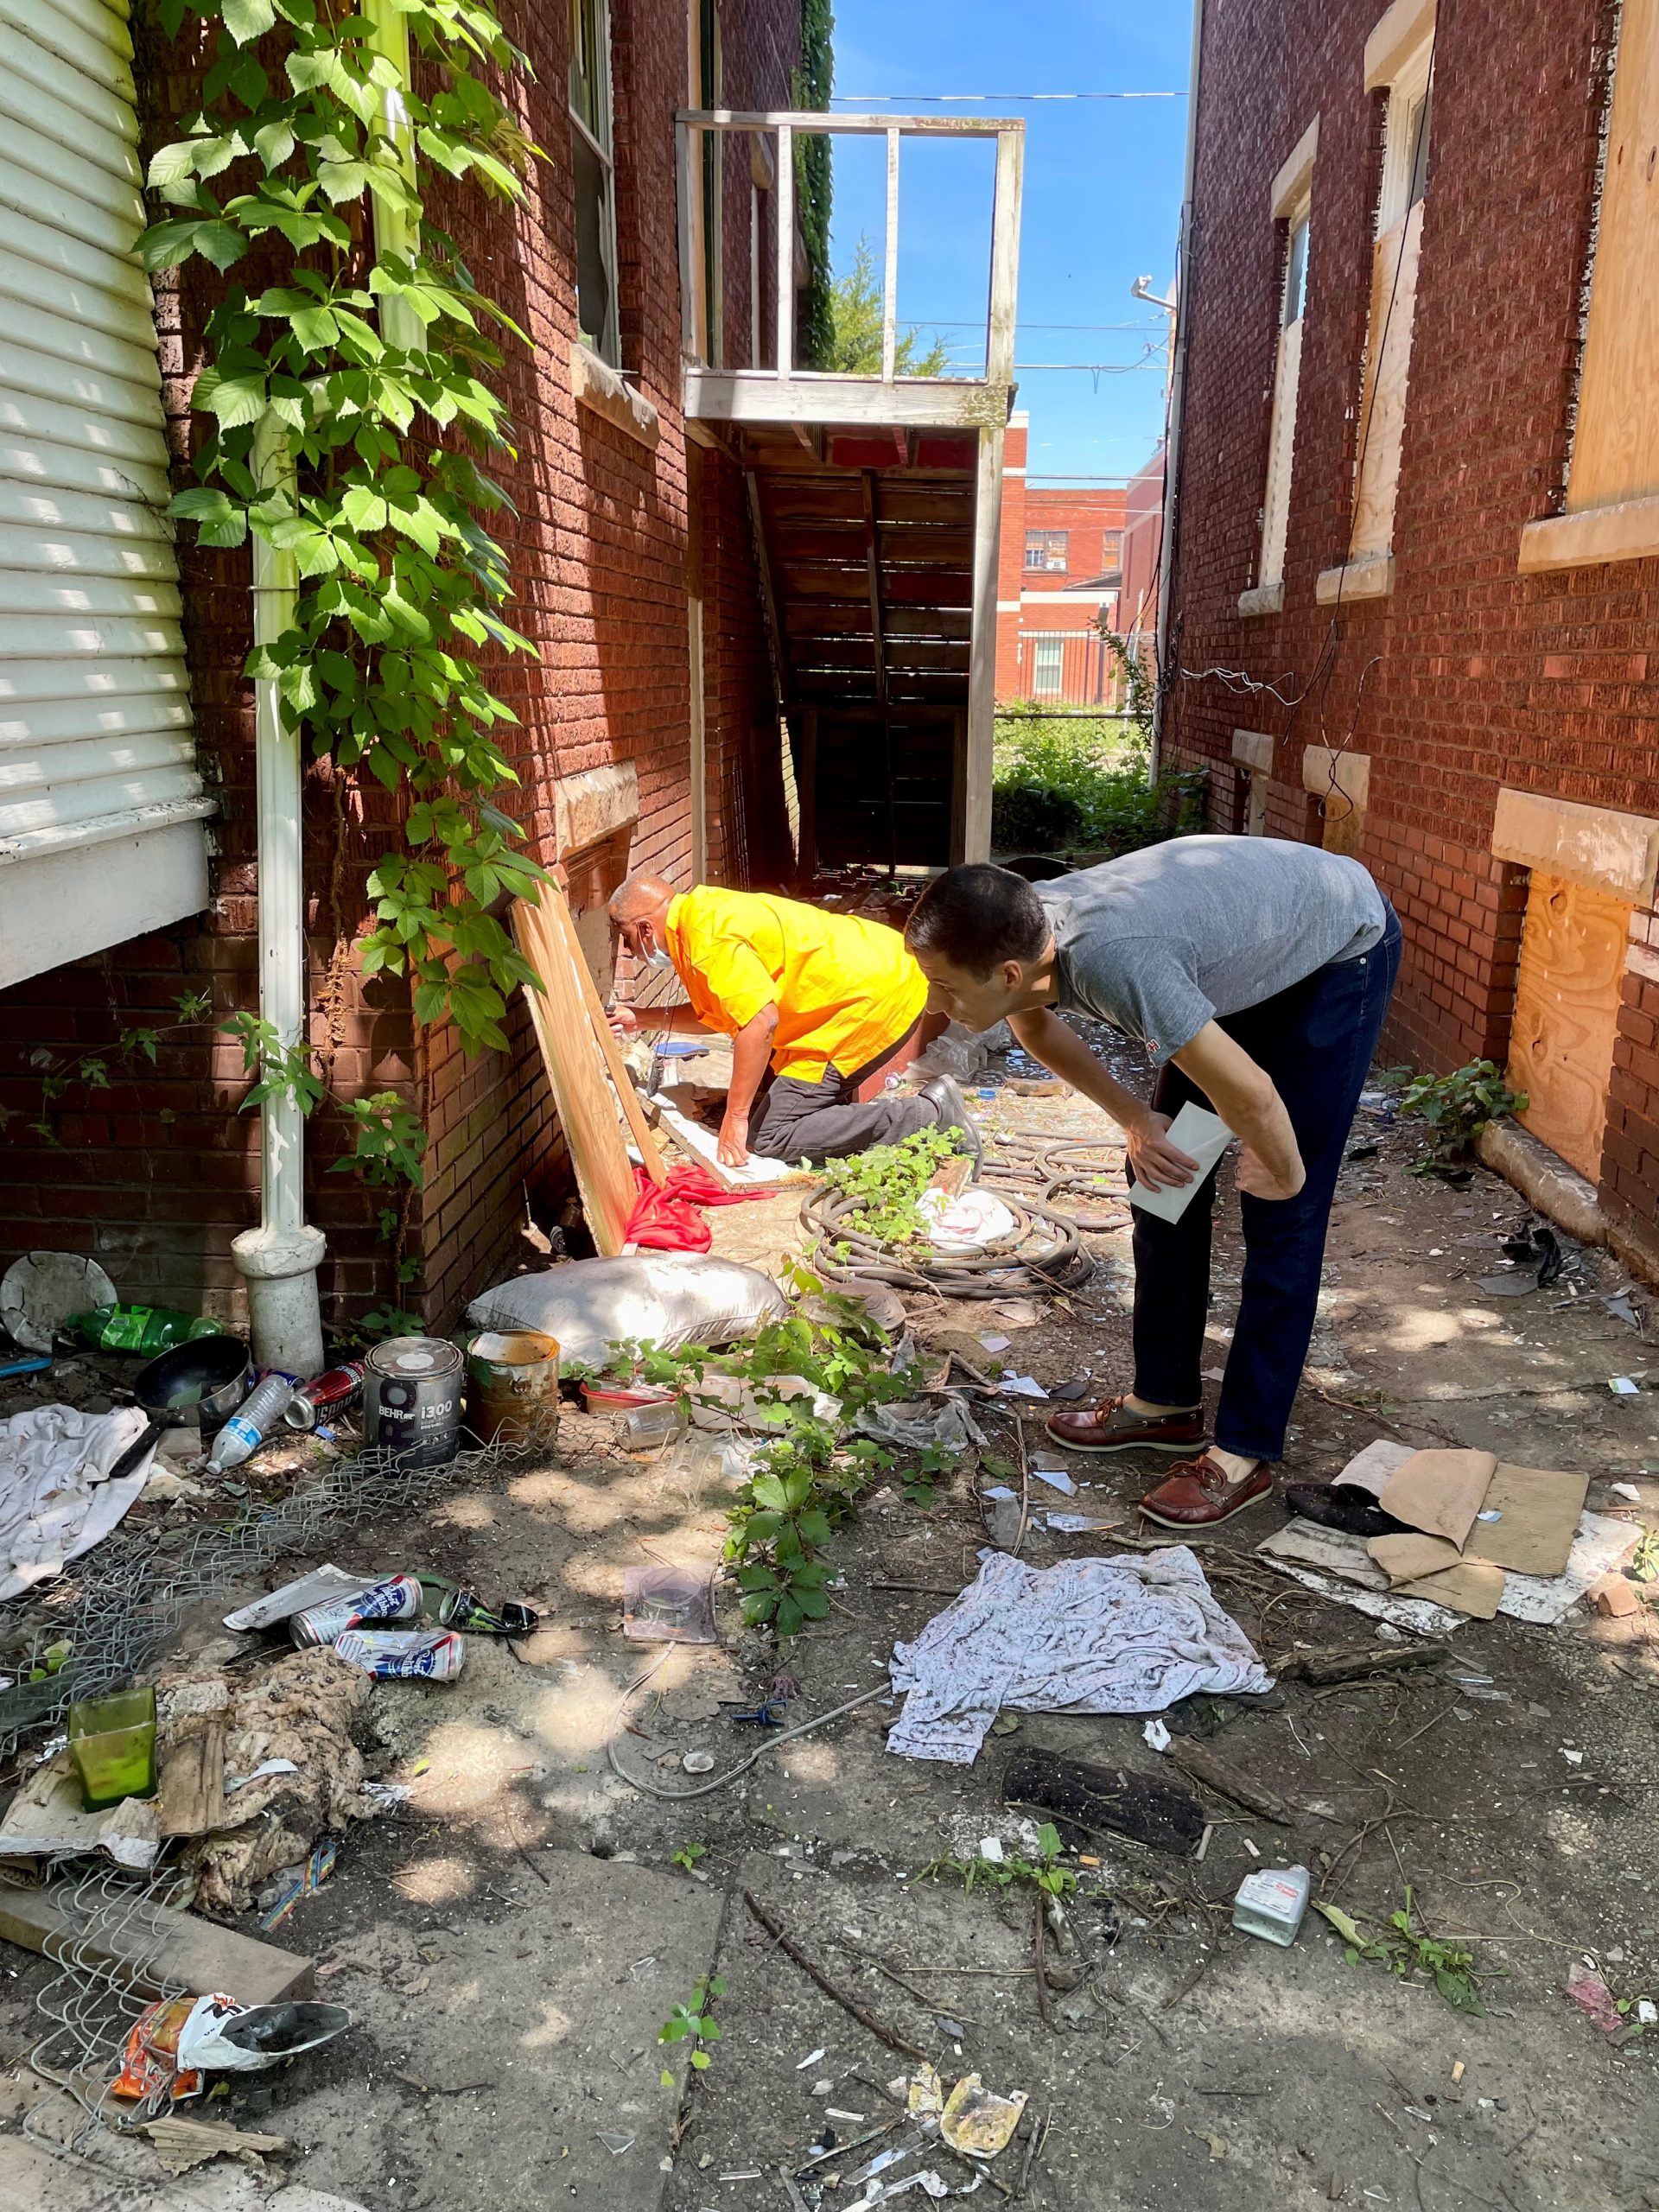 EIS officer Robert Bonacci (right) and DSTDP colleague Ken Myers (left) search abandoned homes while doing street outreach during an HIV outbreak among people who inject drugs in Kanawha County, West Virginia in June 2021.